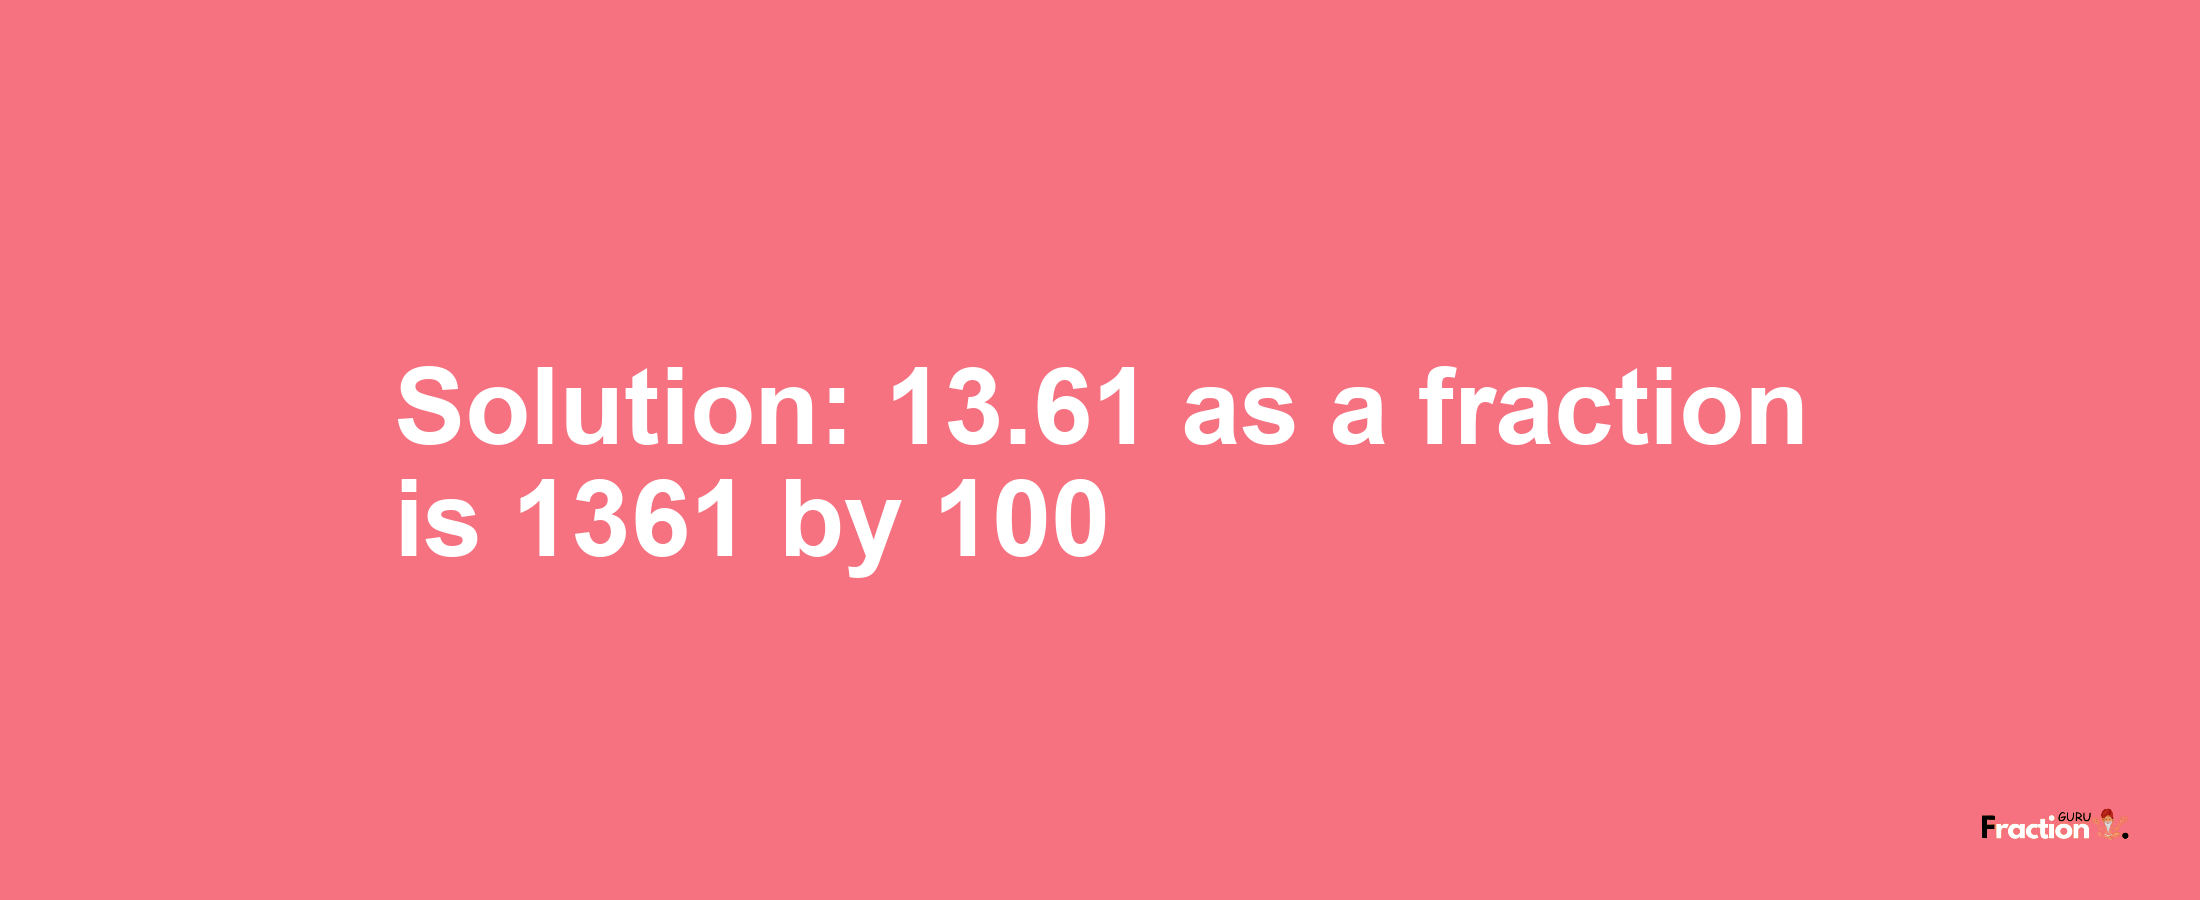 Solution:13.61 as a fraction is 1361/100